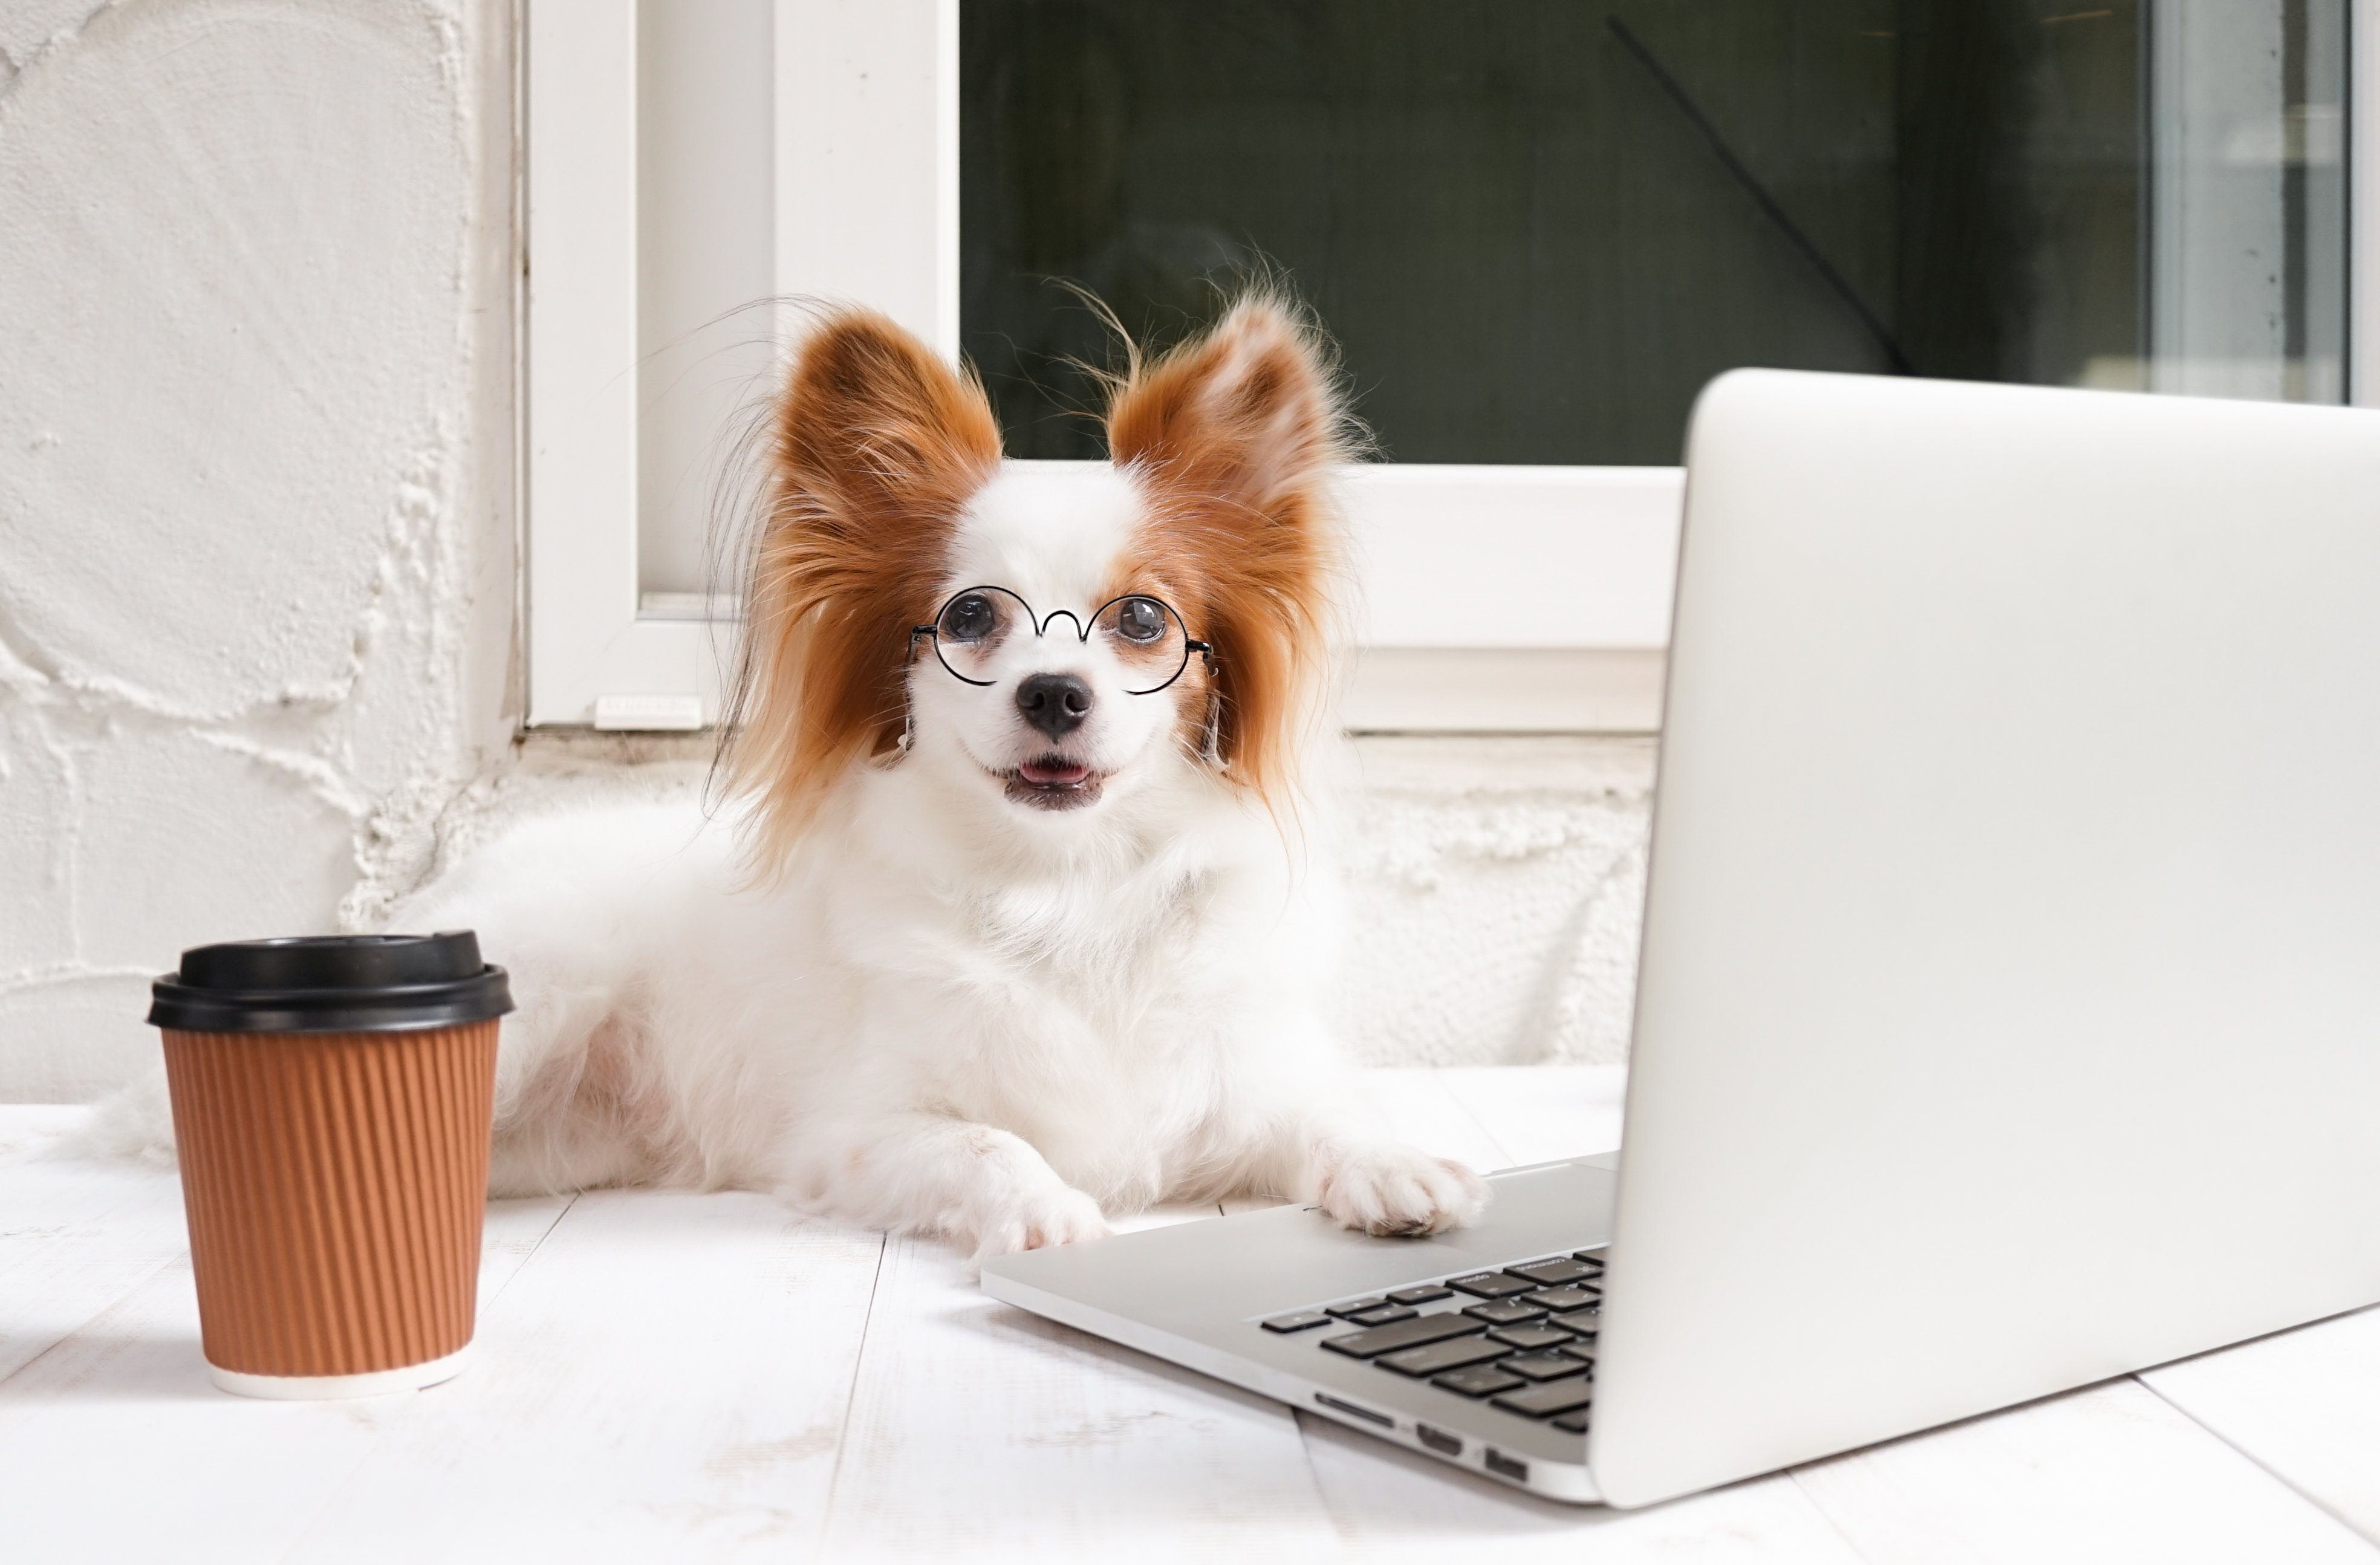 Funny Photos of Dogs “Working From Home” | Reader's Digest Canada